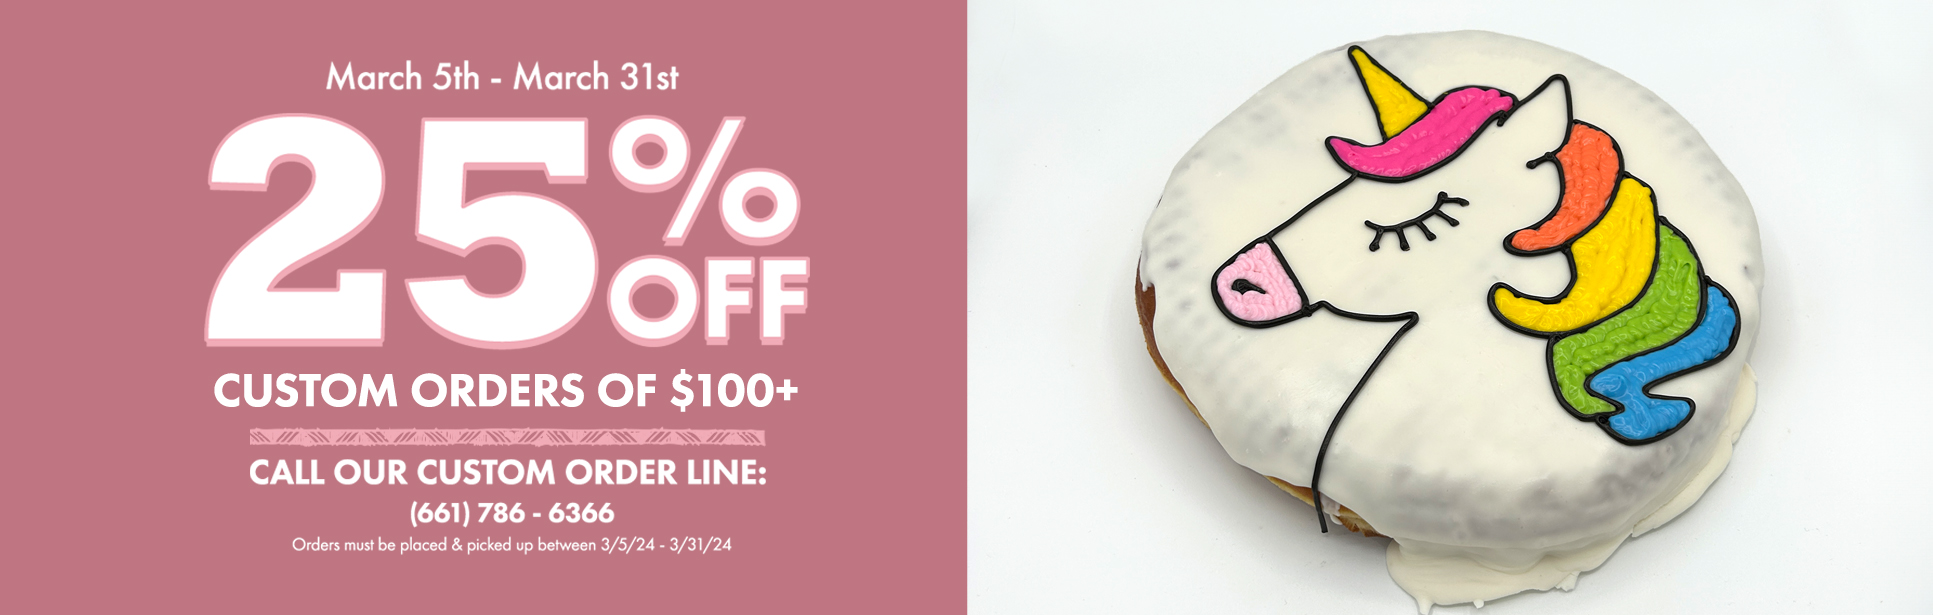 image of unicorn doughnut and 25% off custom orders of $100 or more.